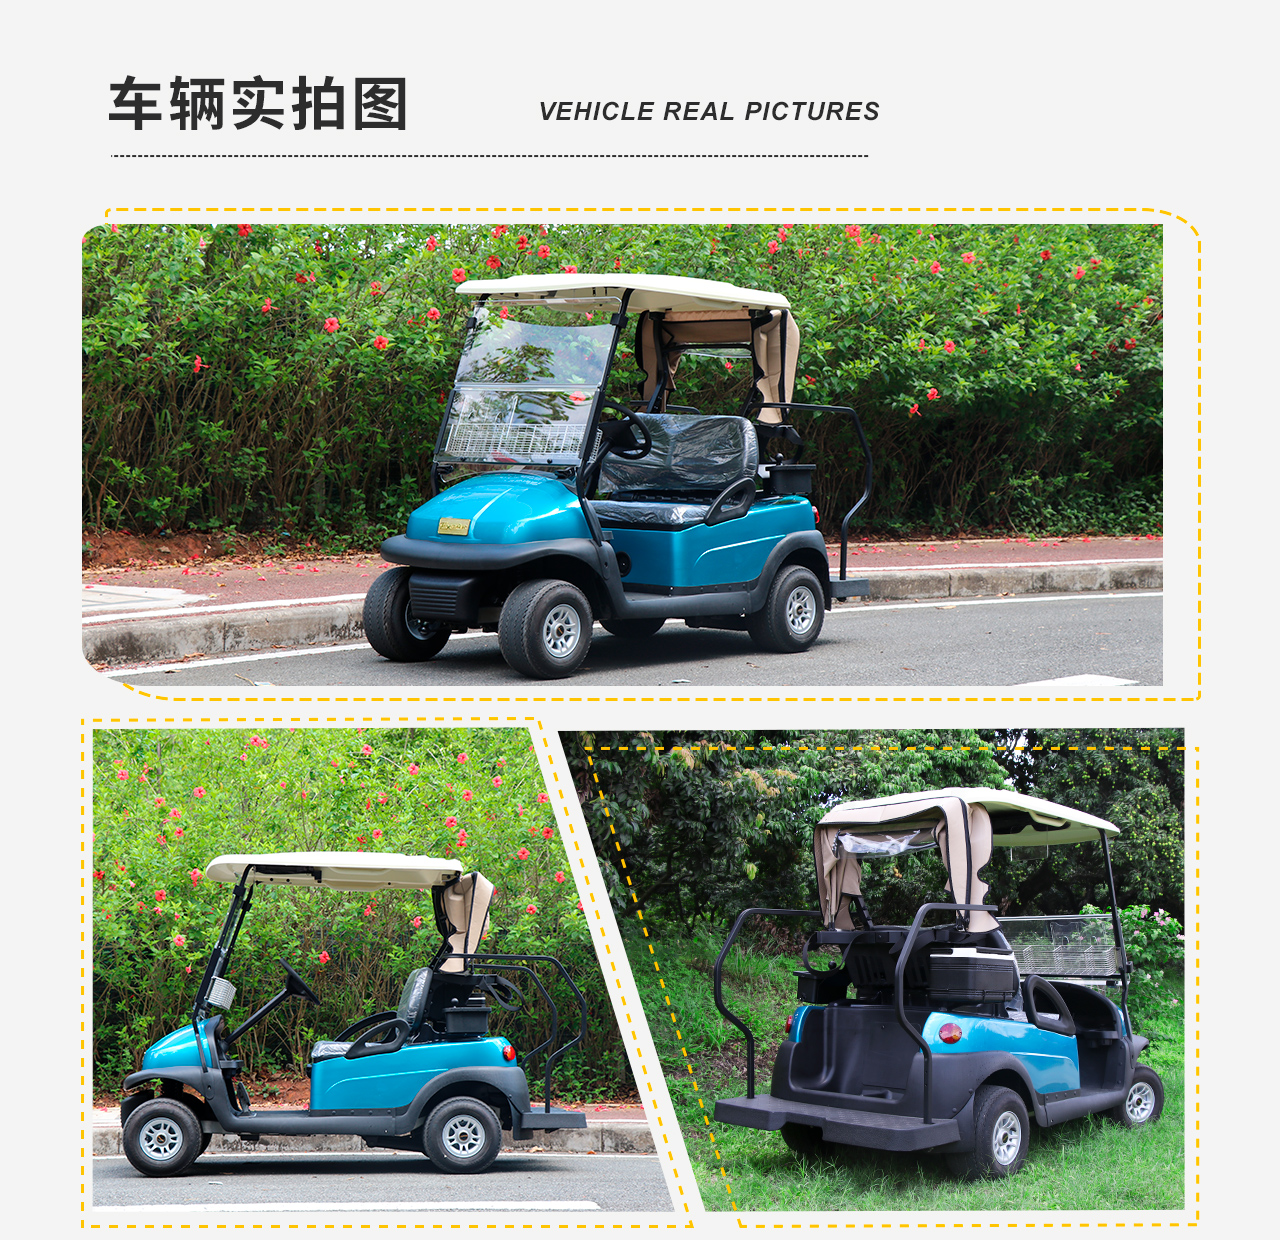 Donglang Electric New Energy 2 Golf Sightseeing Bus - Scenic Area Park Tour bus service - A1S2